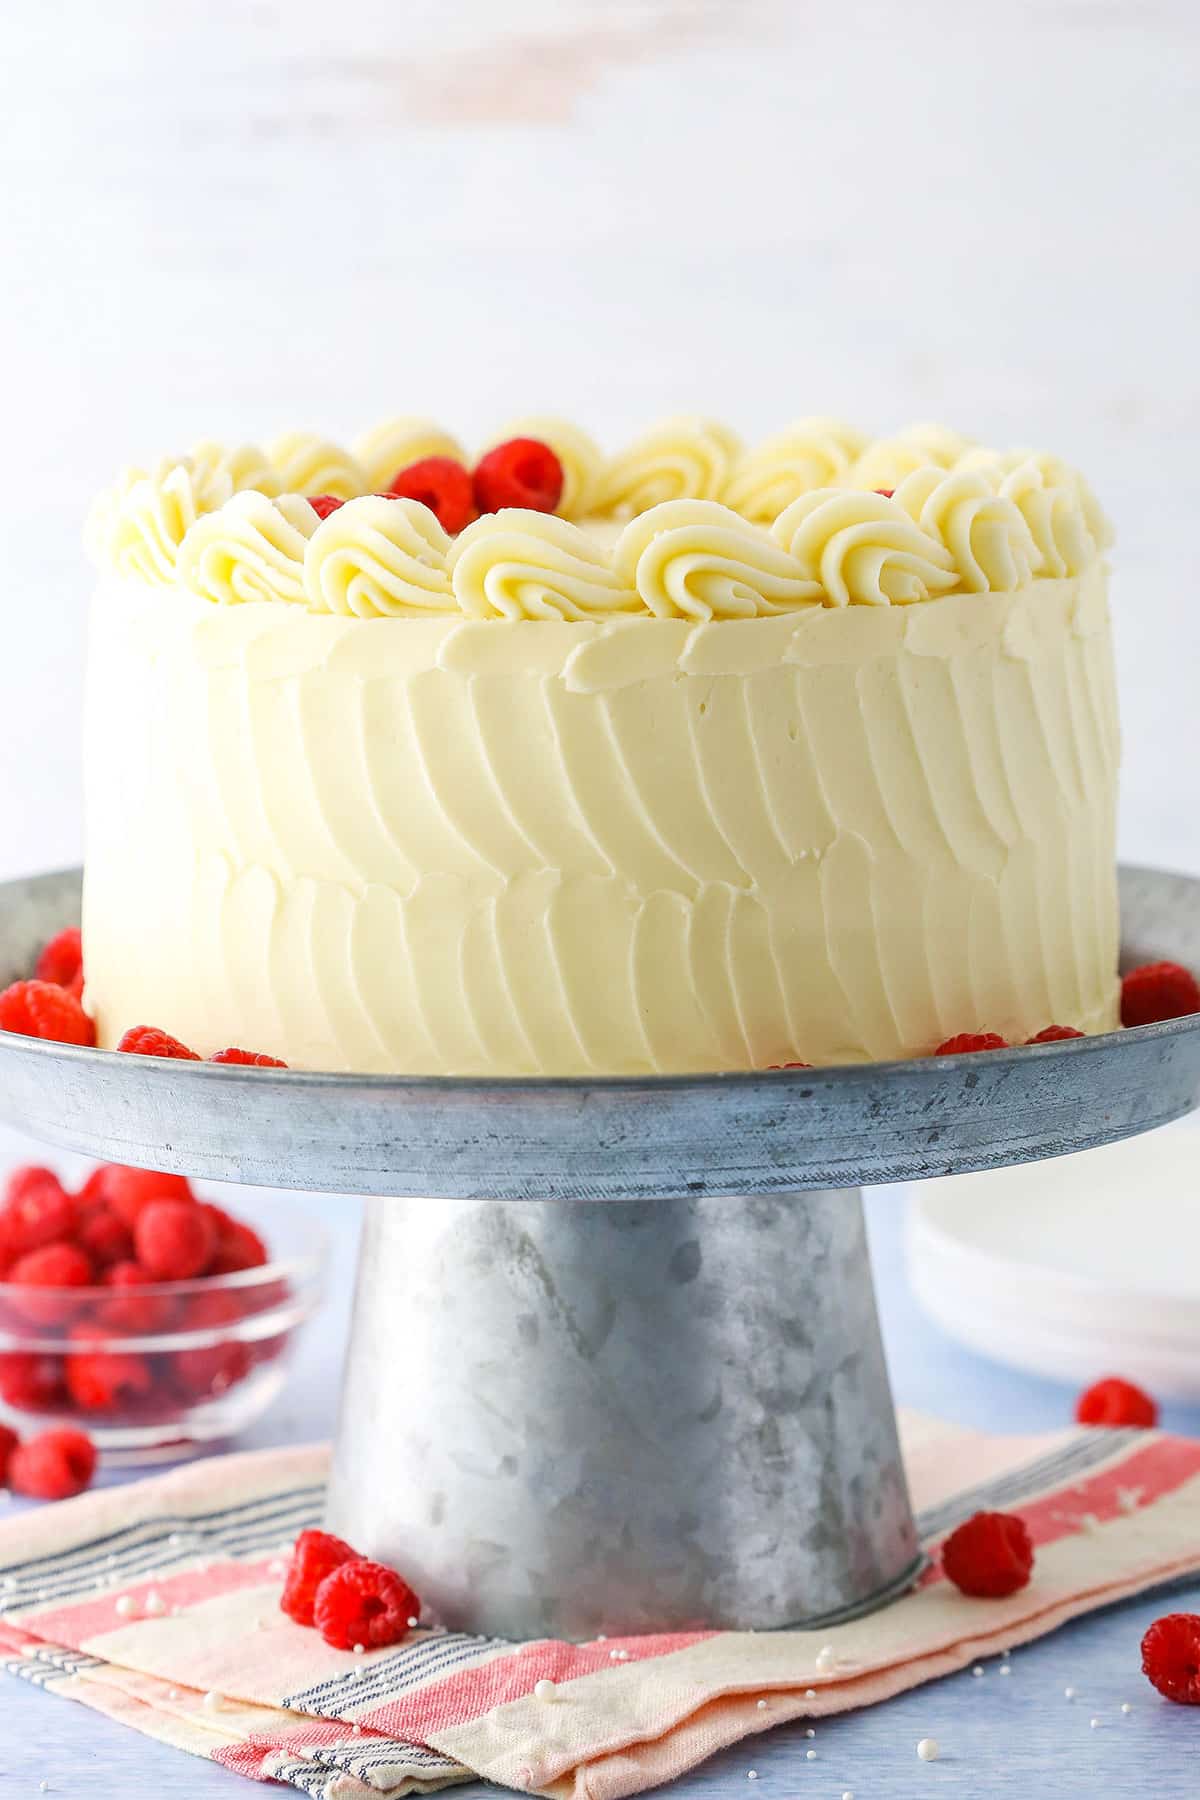 Side view of a full Raspberry Dream Cake on a silver cake stand surrounded by raspberries